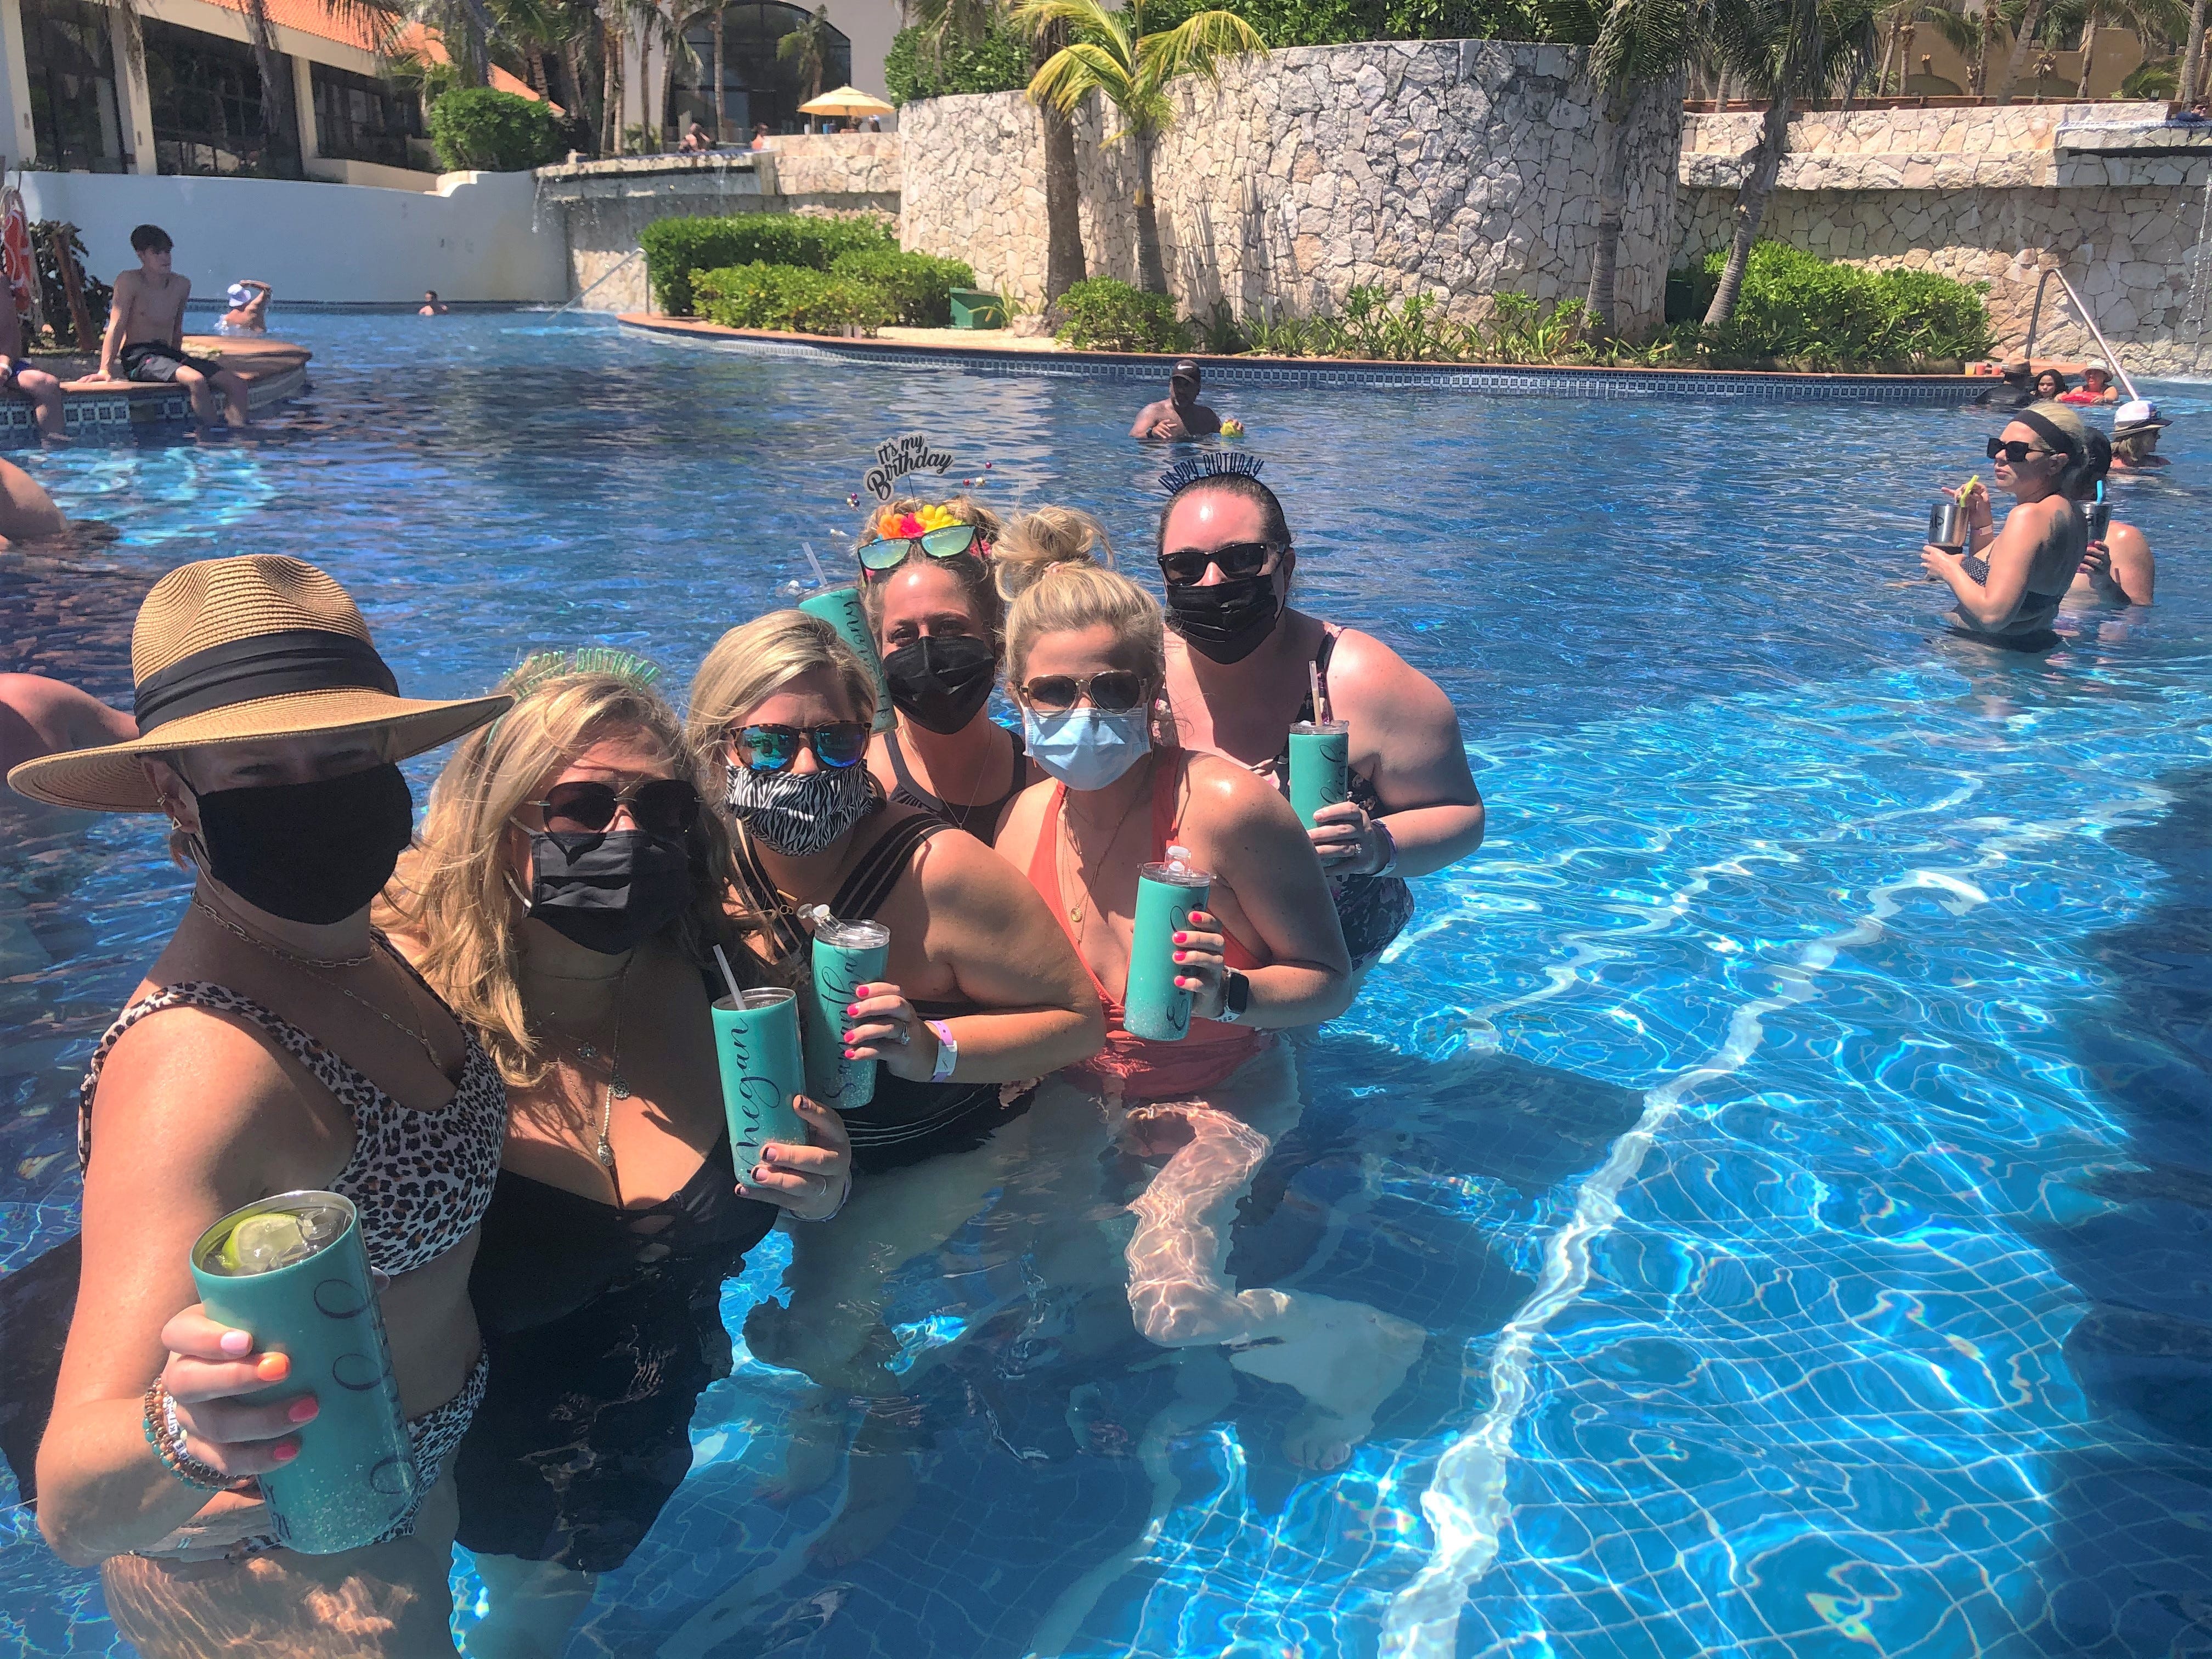 A group of friends from the Midwest flew to Cancun to celebrate the 40th birthday of Harmony Godsey, who sported a flowery birthday tiara, third from right.